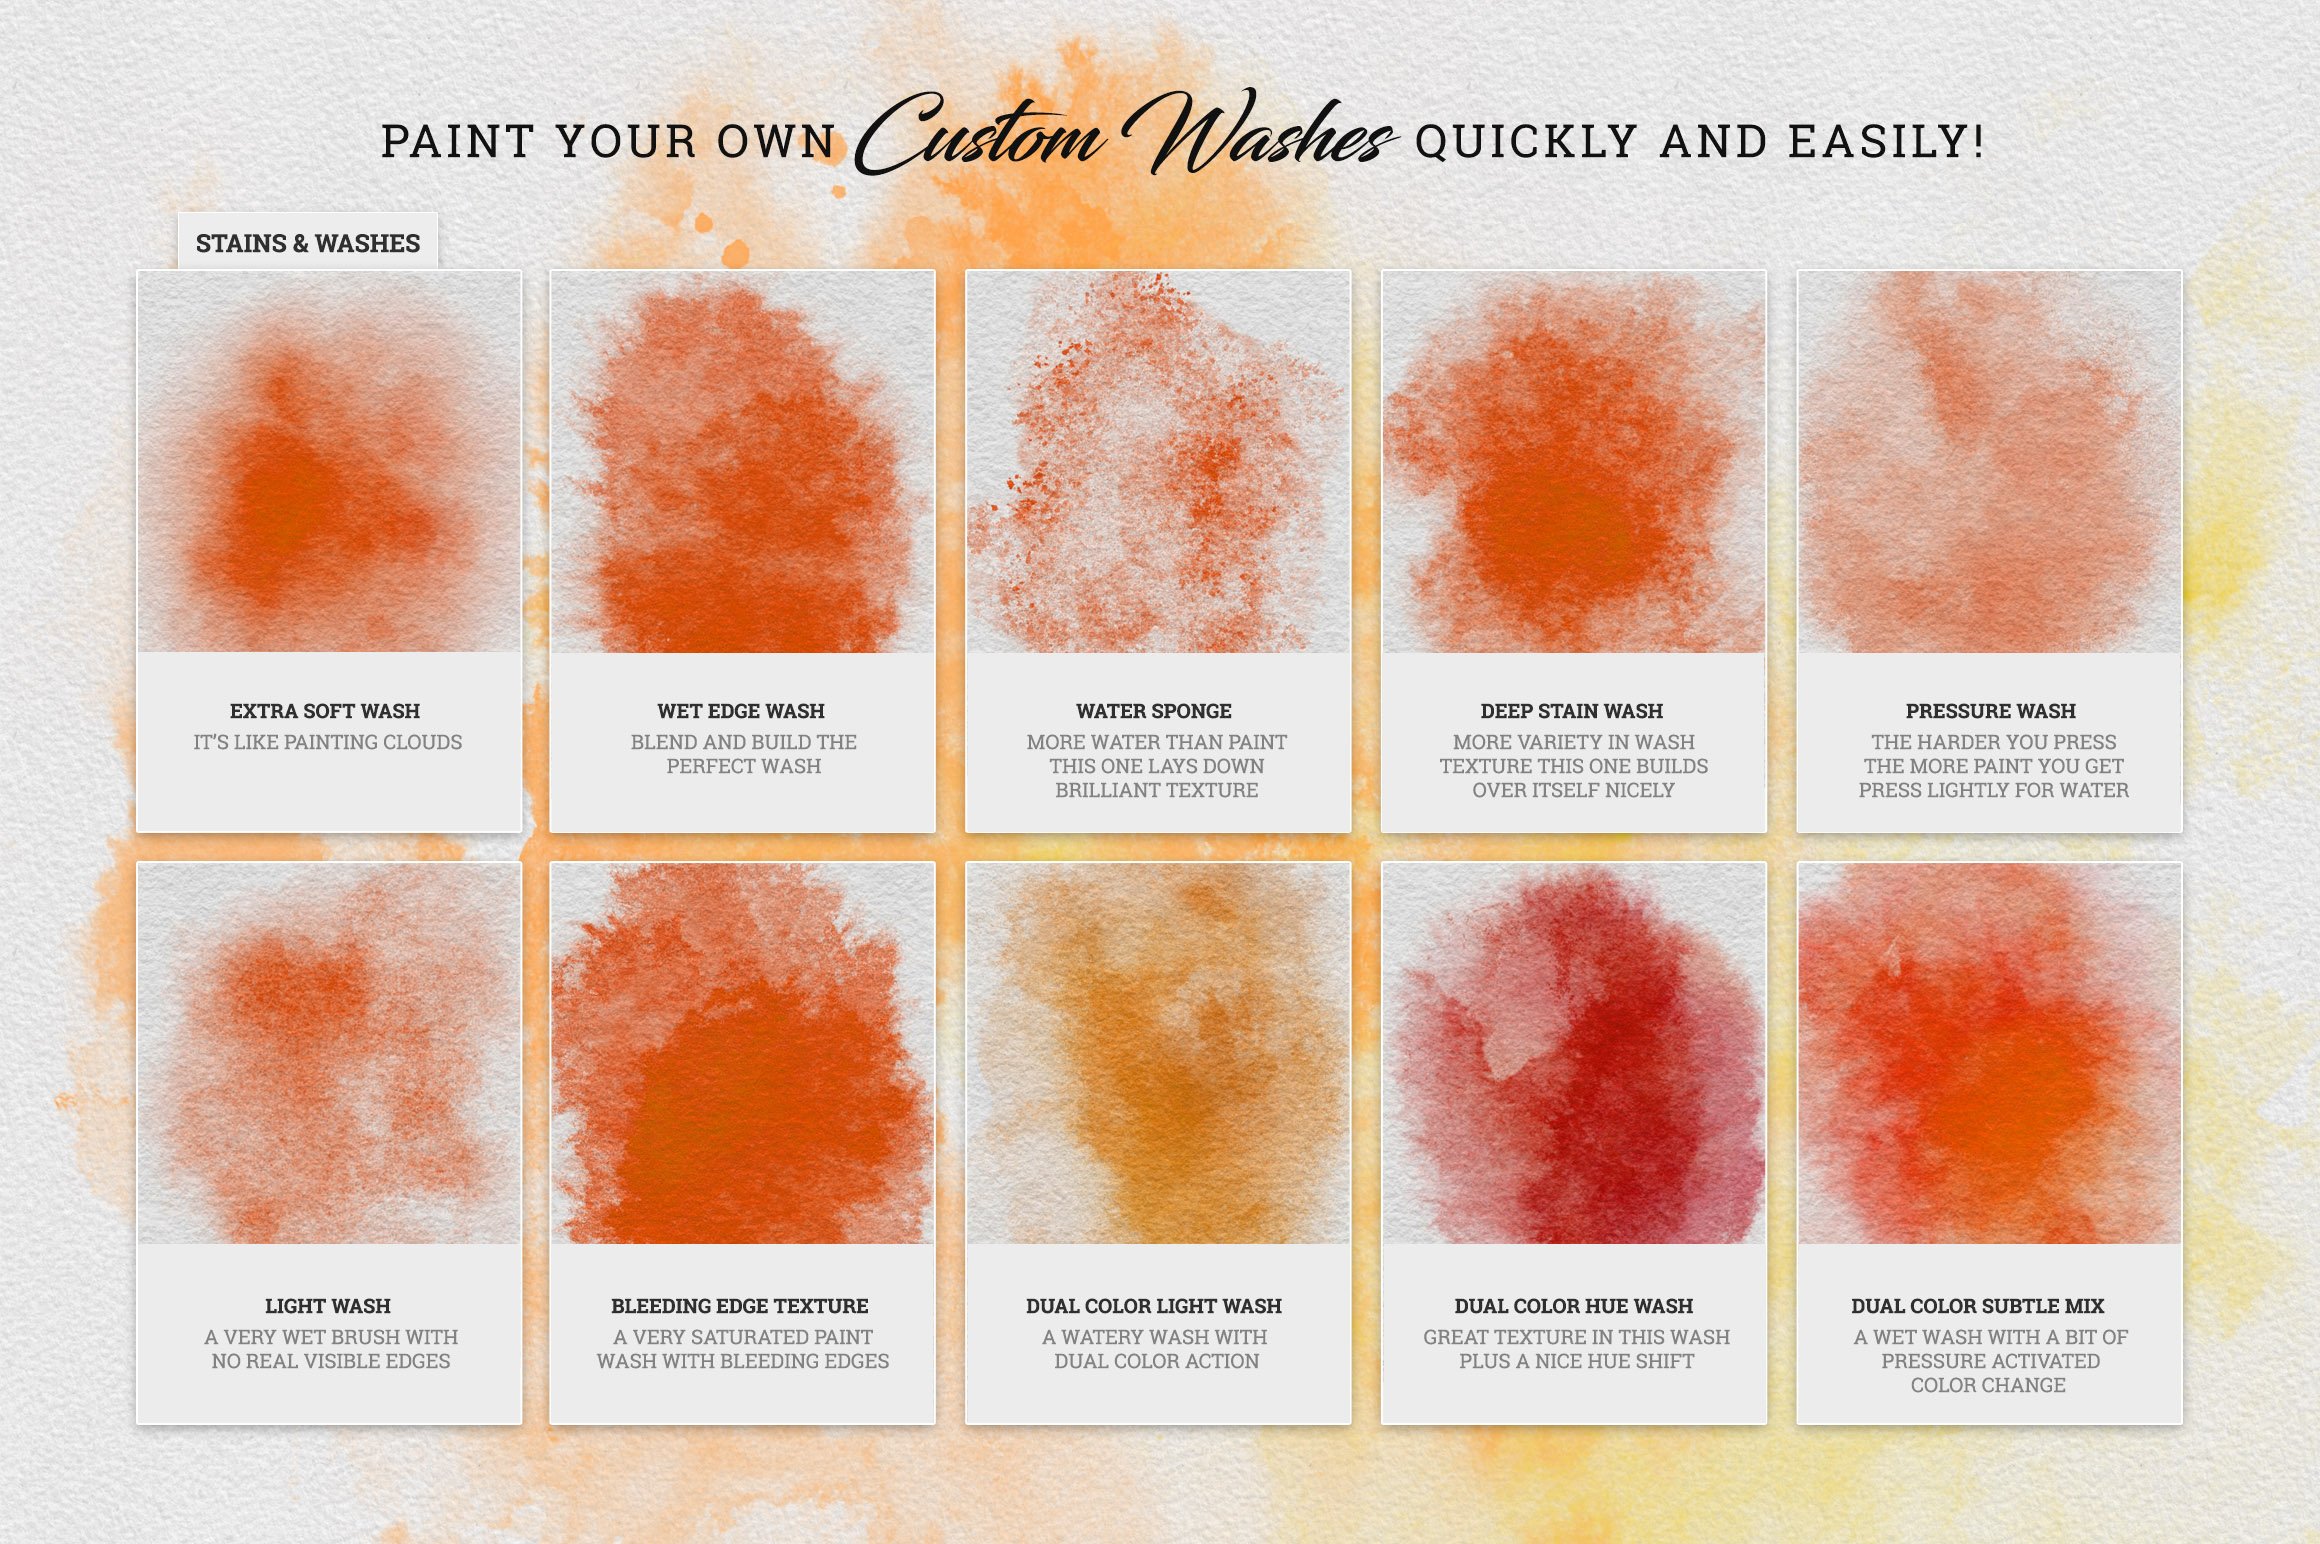 Paint your own custom washes quickly and easily.